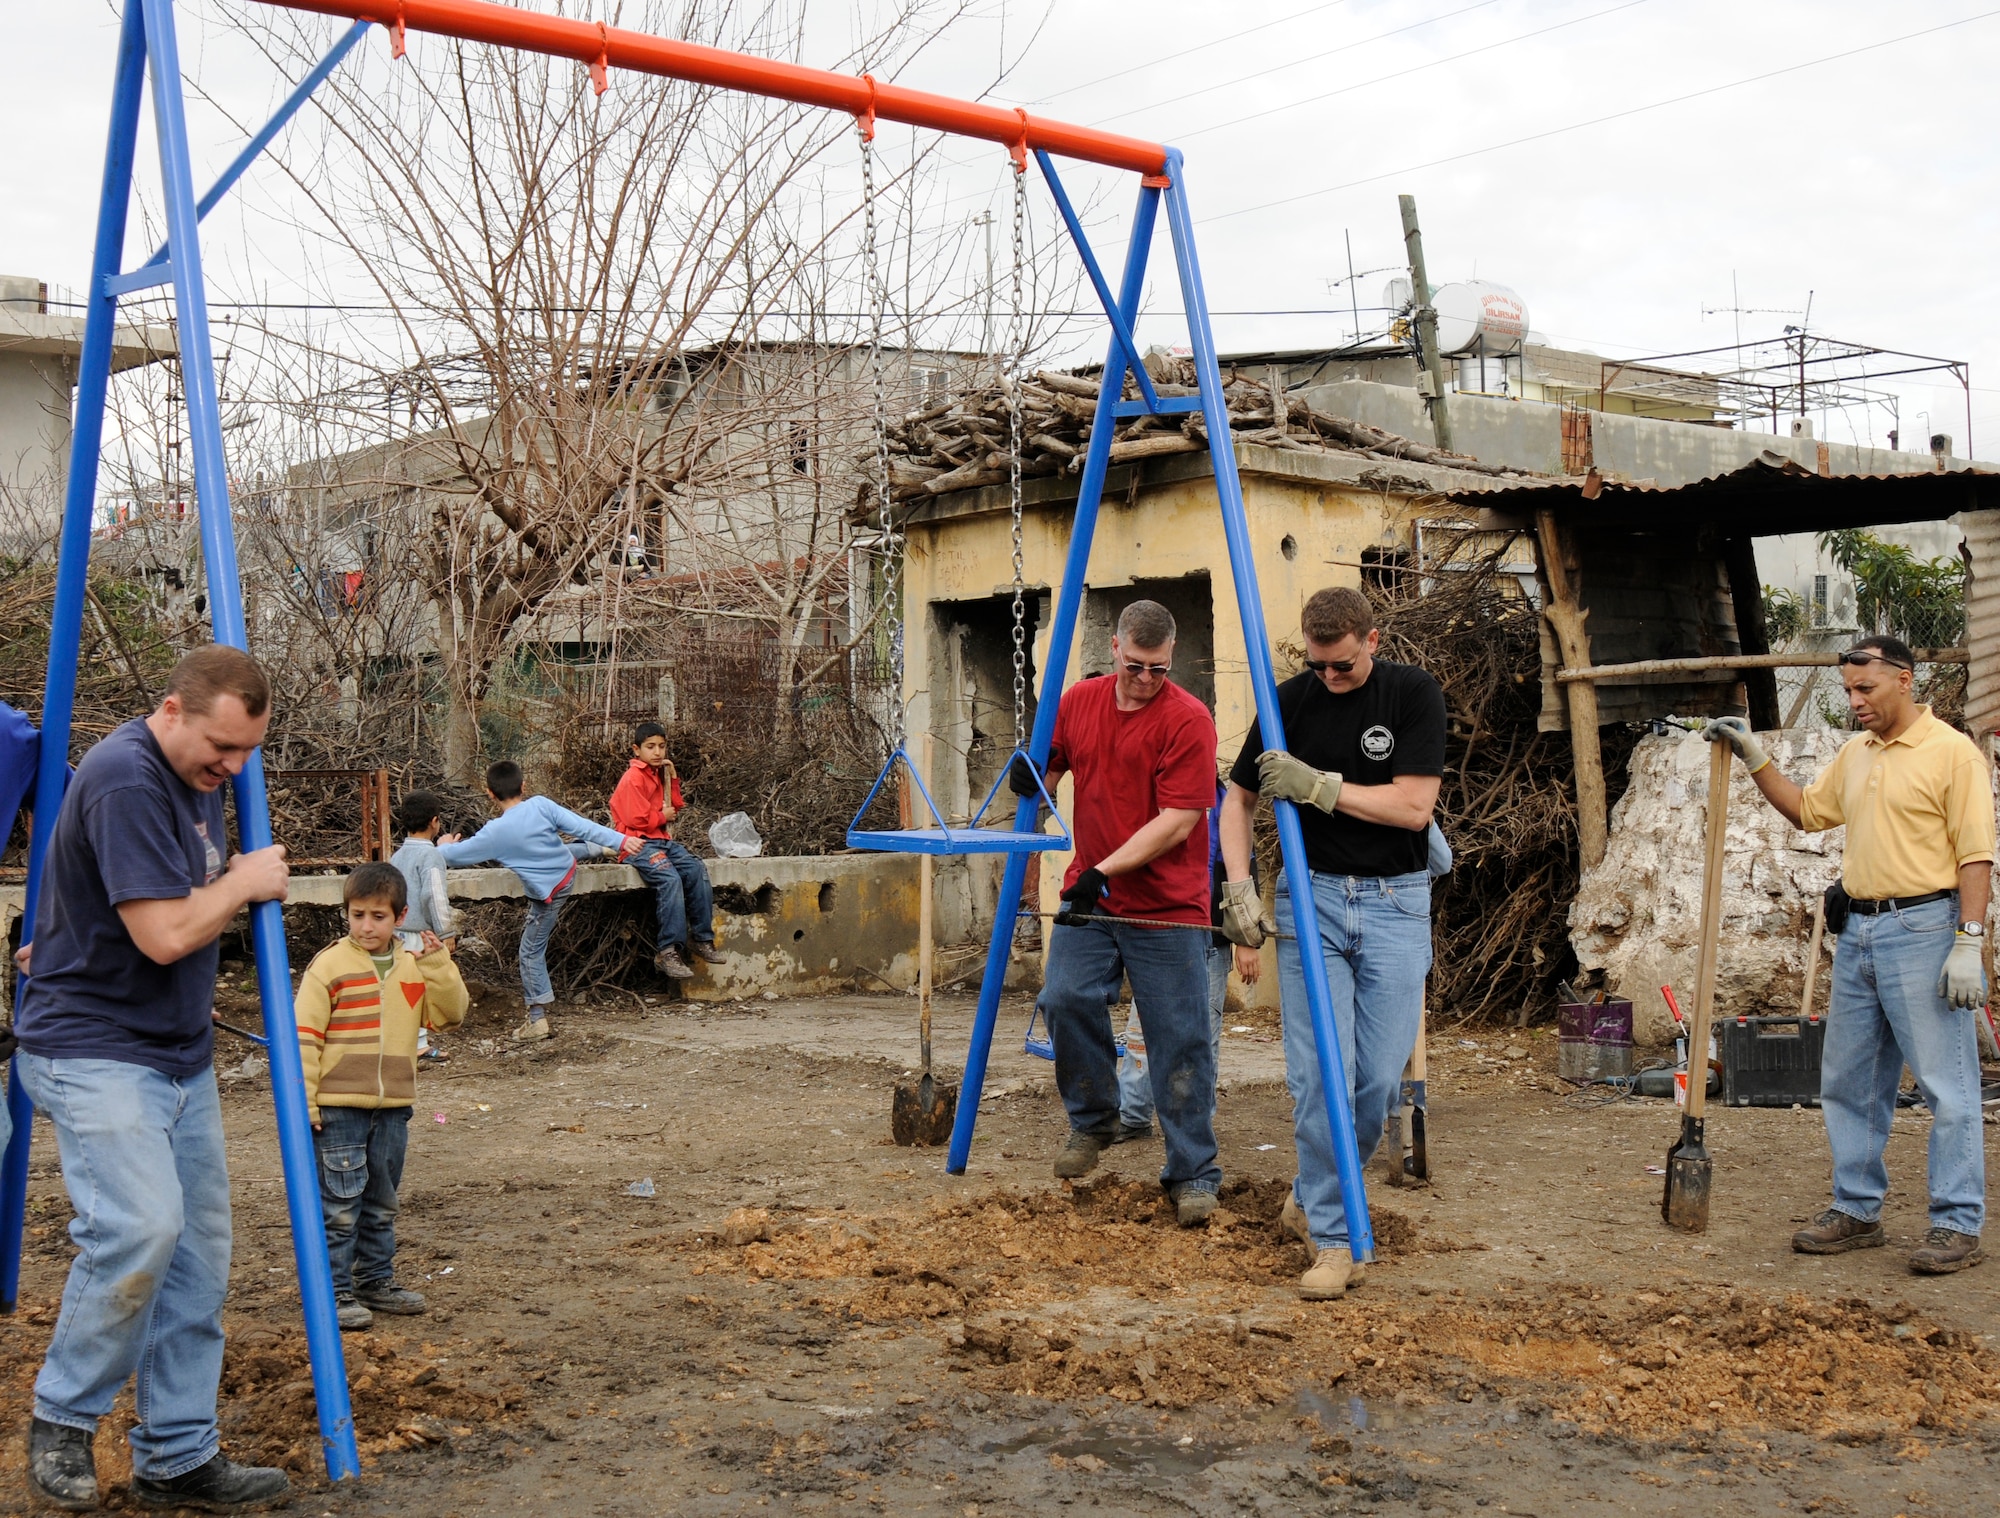 Members from the 385th Air Expeditionary Group place a swing set into the ground at a park being built for local Turkish children Wednesday, Feb. 25, 2009, in Adana, Turkey. The Sioux City, Iowa-based Air National Guardsmen prided themselves on their history of helping those at every location where they serve. (U.S. Air Force photo/Airman 1st Class Amber Russell)